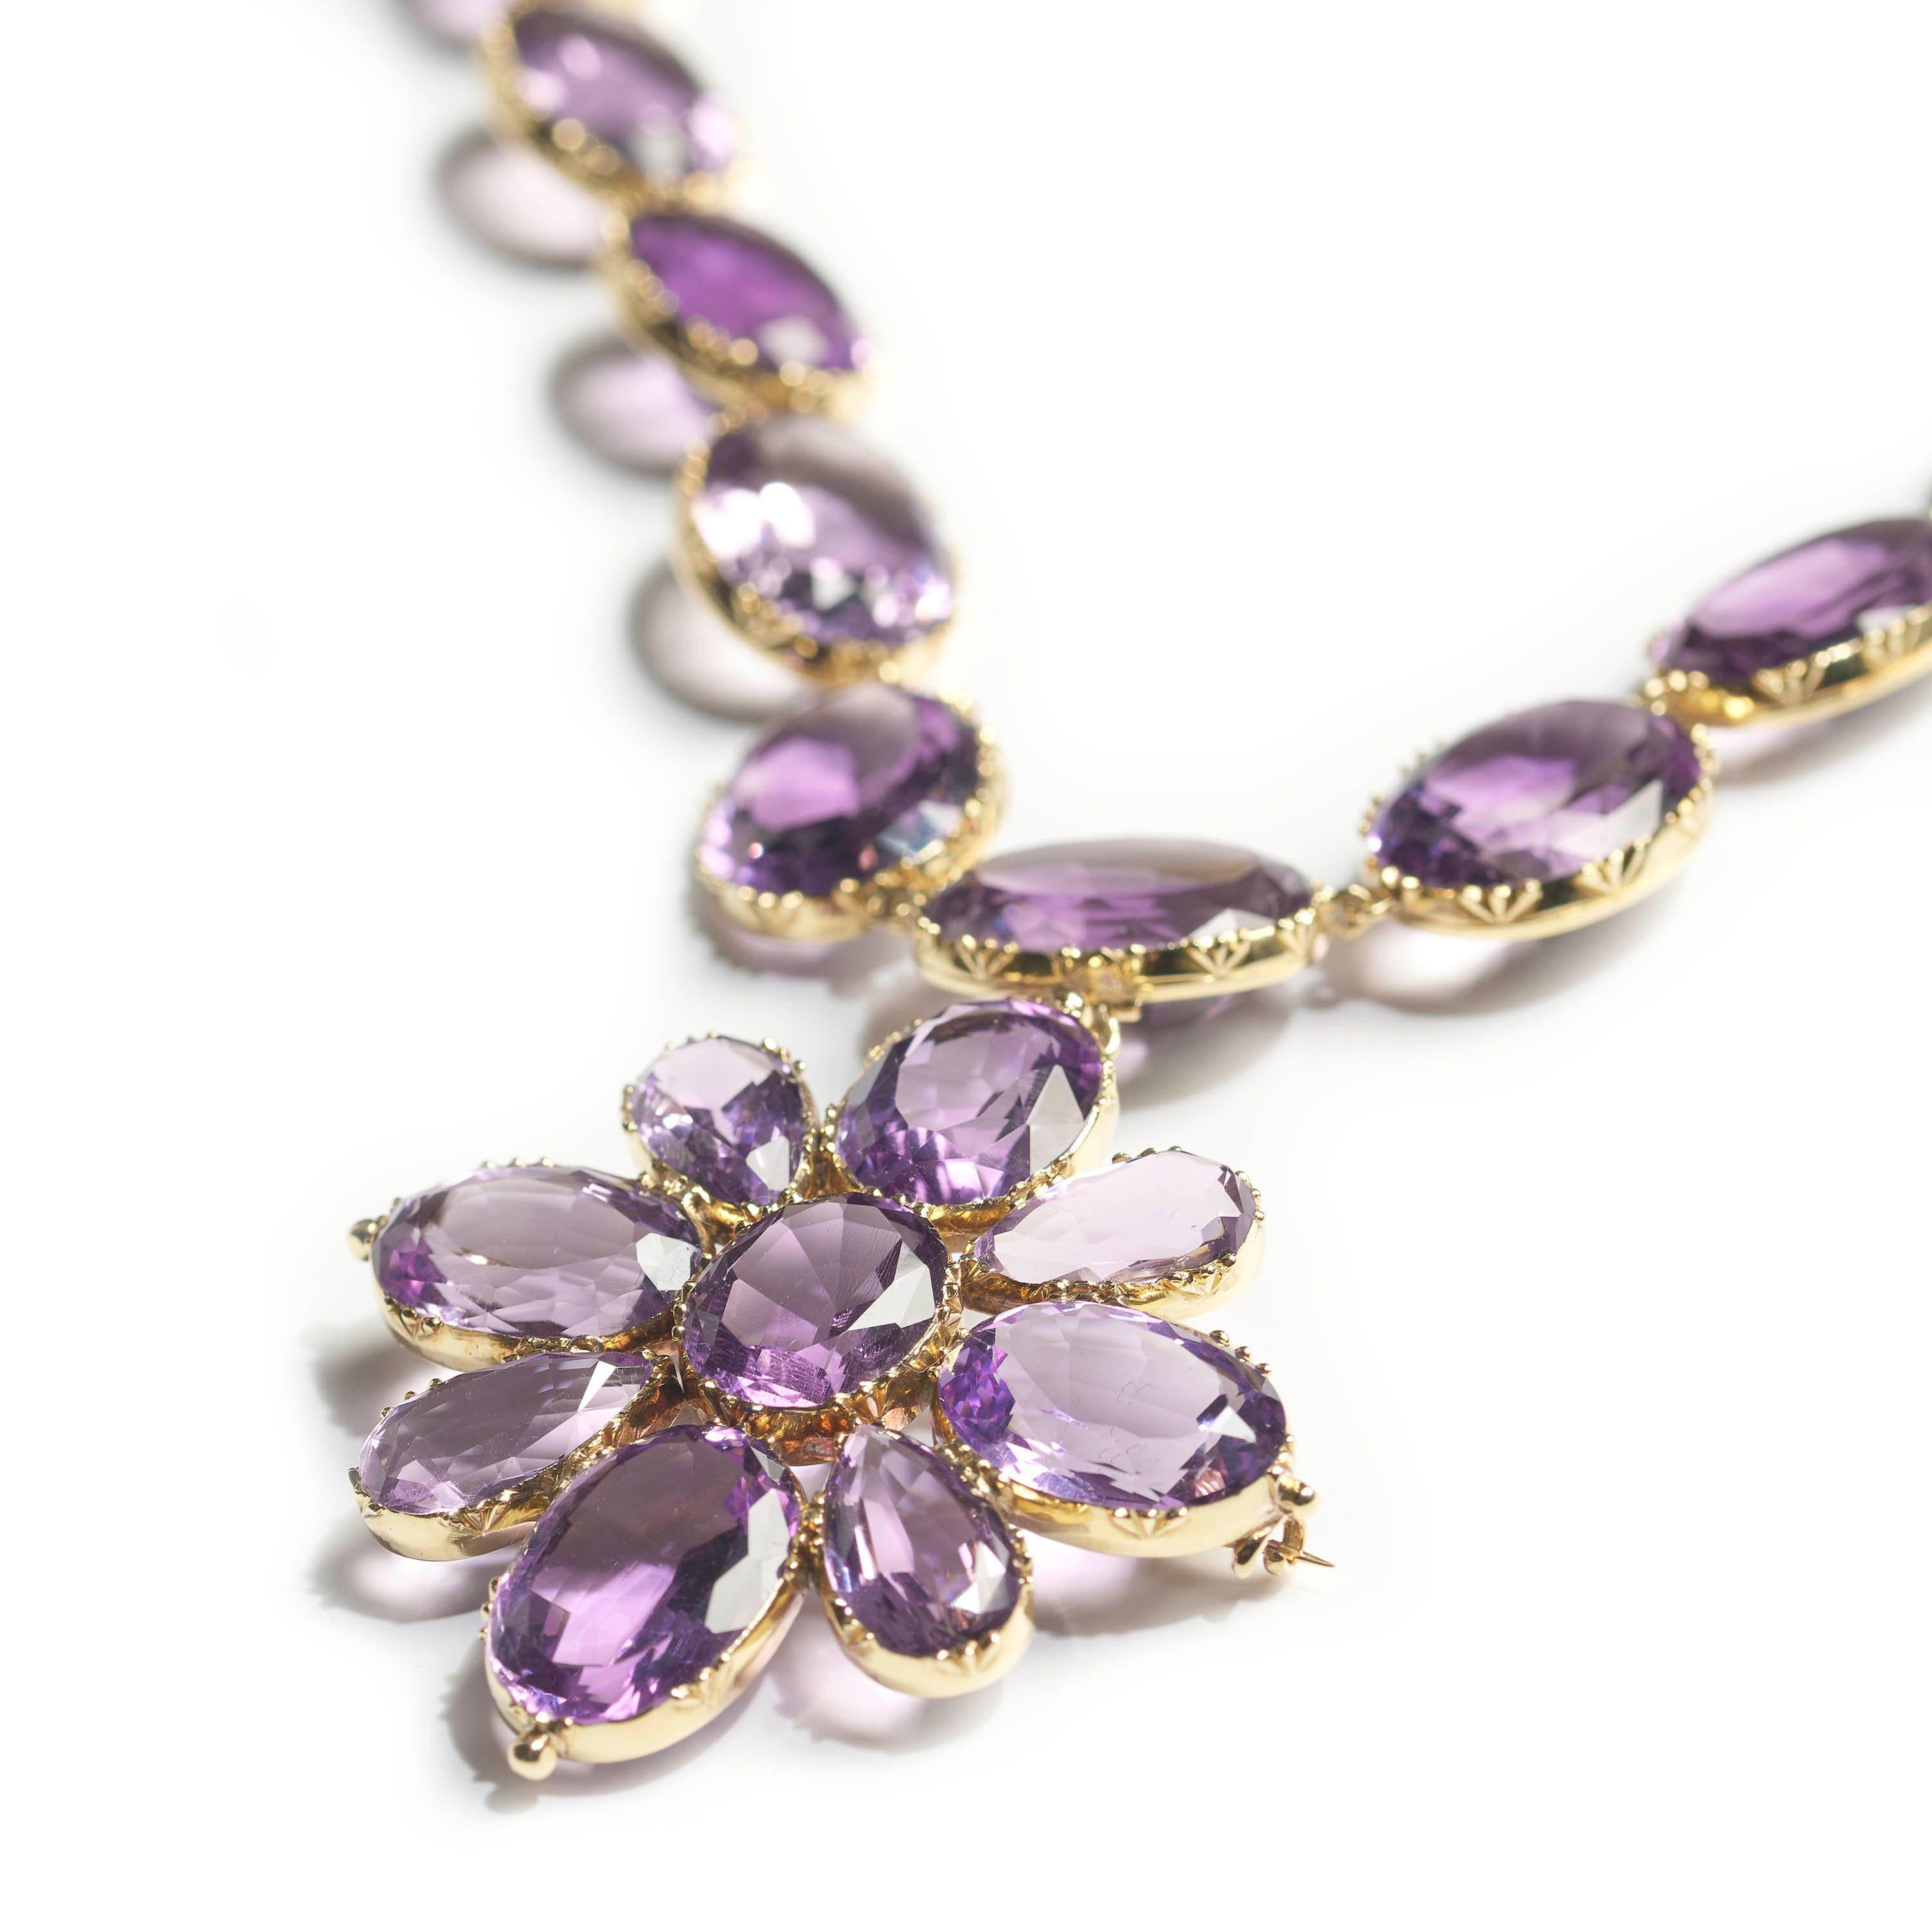 Victorian Antique Amethyst and Gold Riviére Necklace and Cross Pendant, Circa 1880